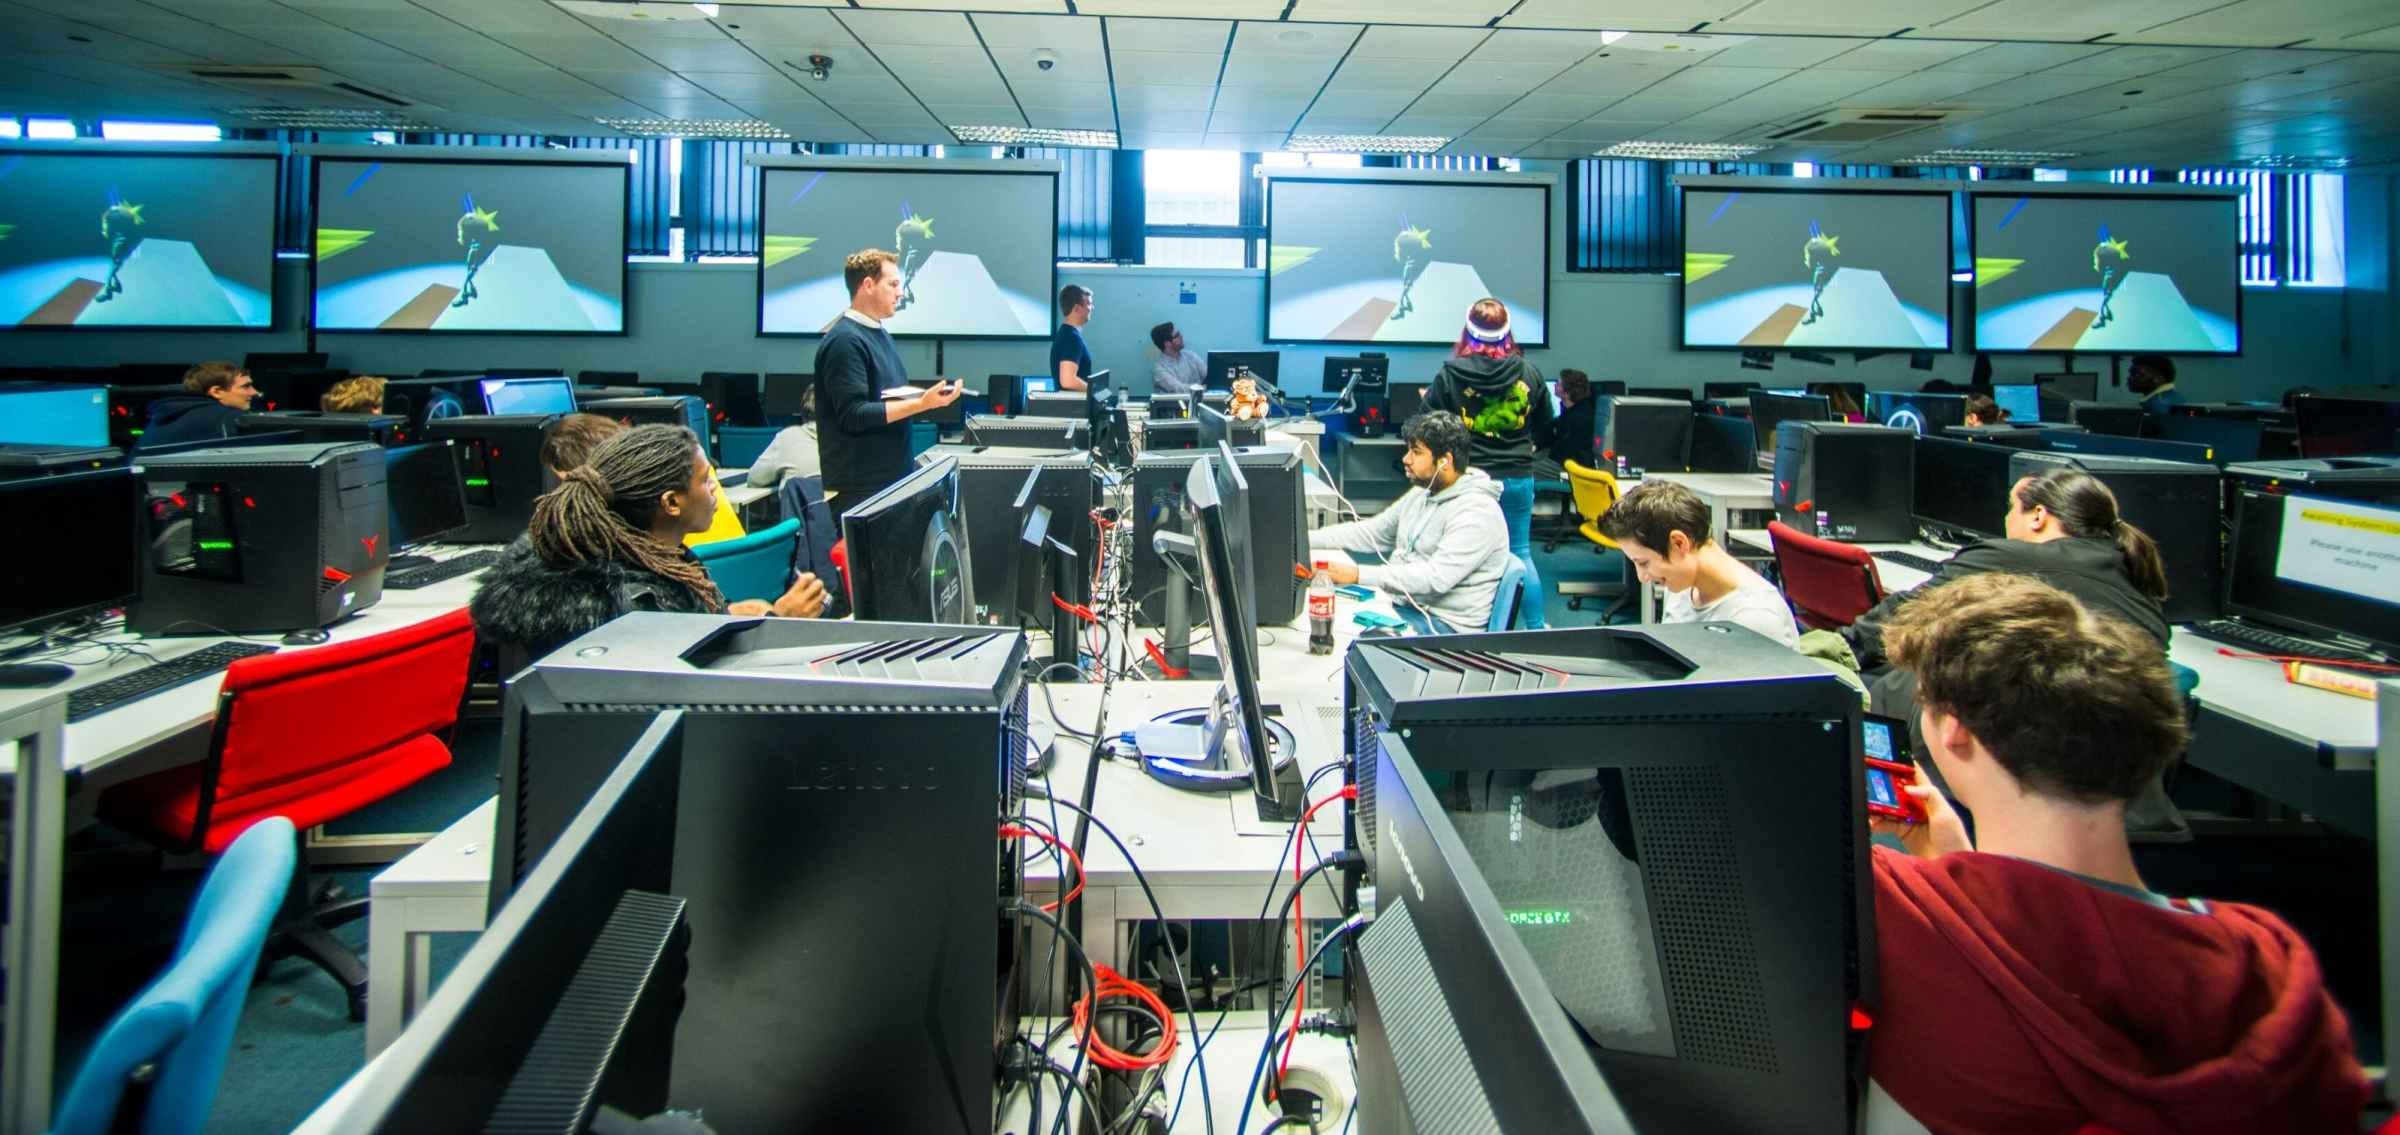 Students working in a computer suite.